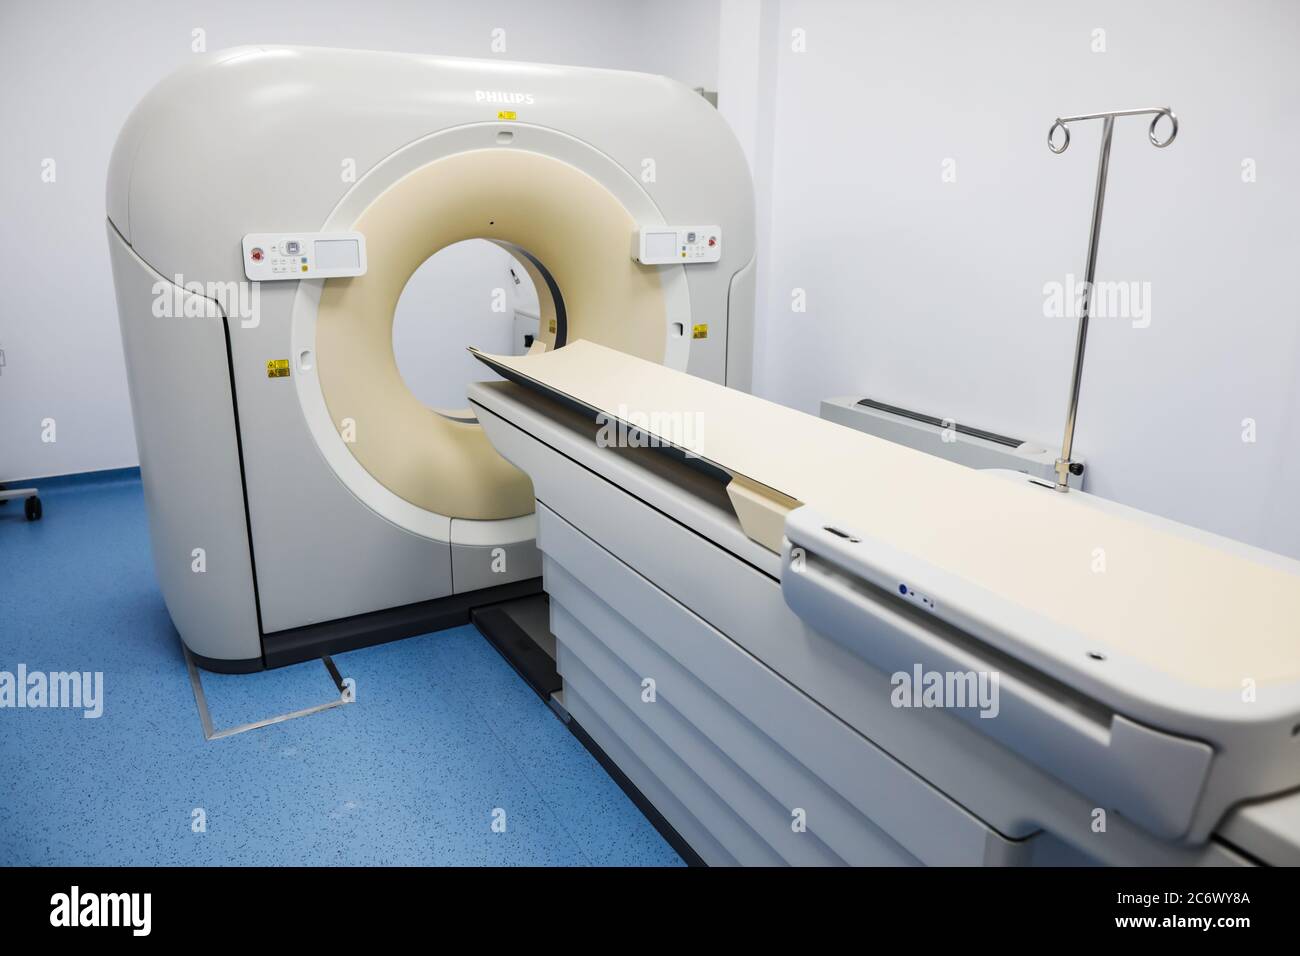 Bucharest / Romania - July 12, 2020: Philips computed tomography, or CT, equipment in a new medical clinic. Stock Photo